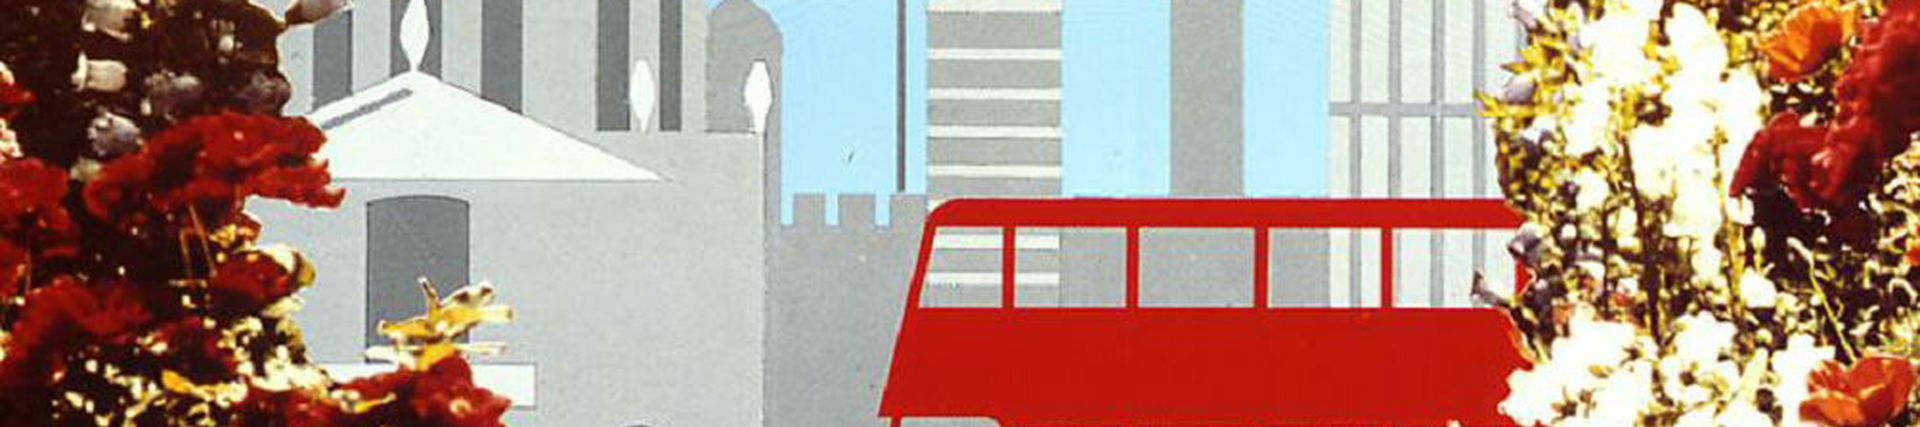 Poster with illustration of a bus and St Pauls with flowers in the foreground